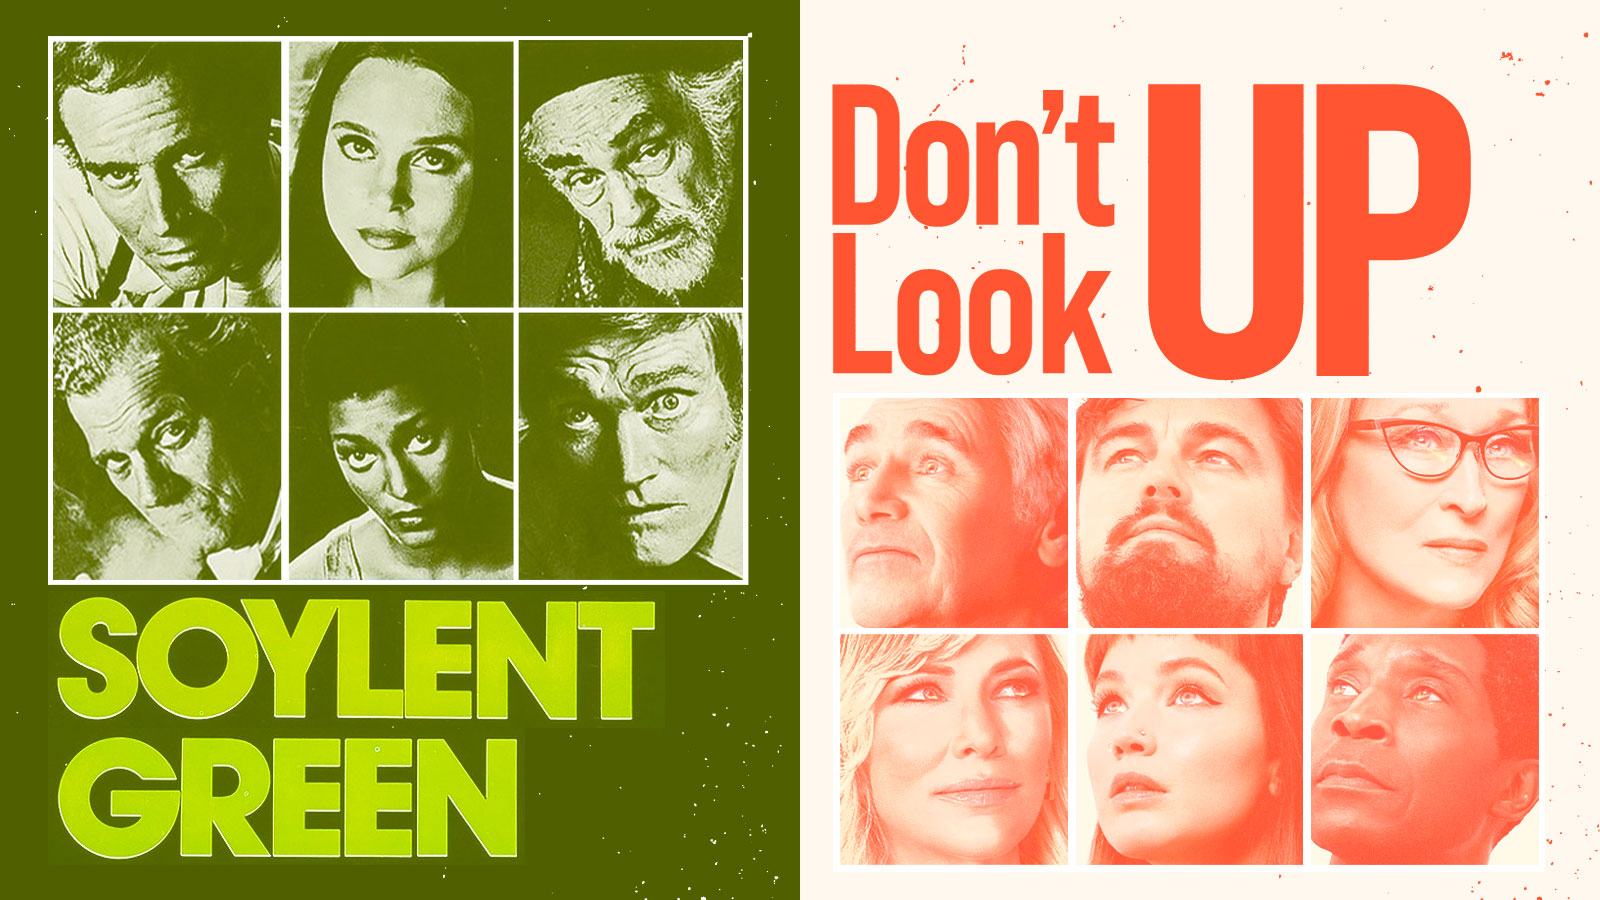 Soylent Green and Don't Look Up posters